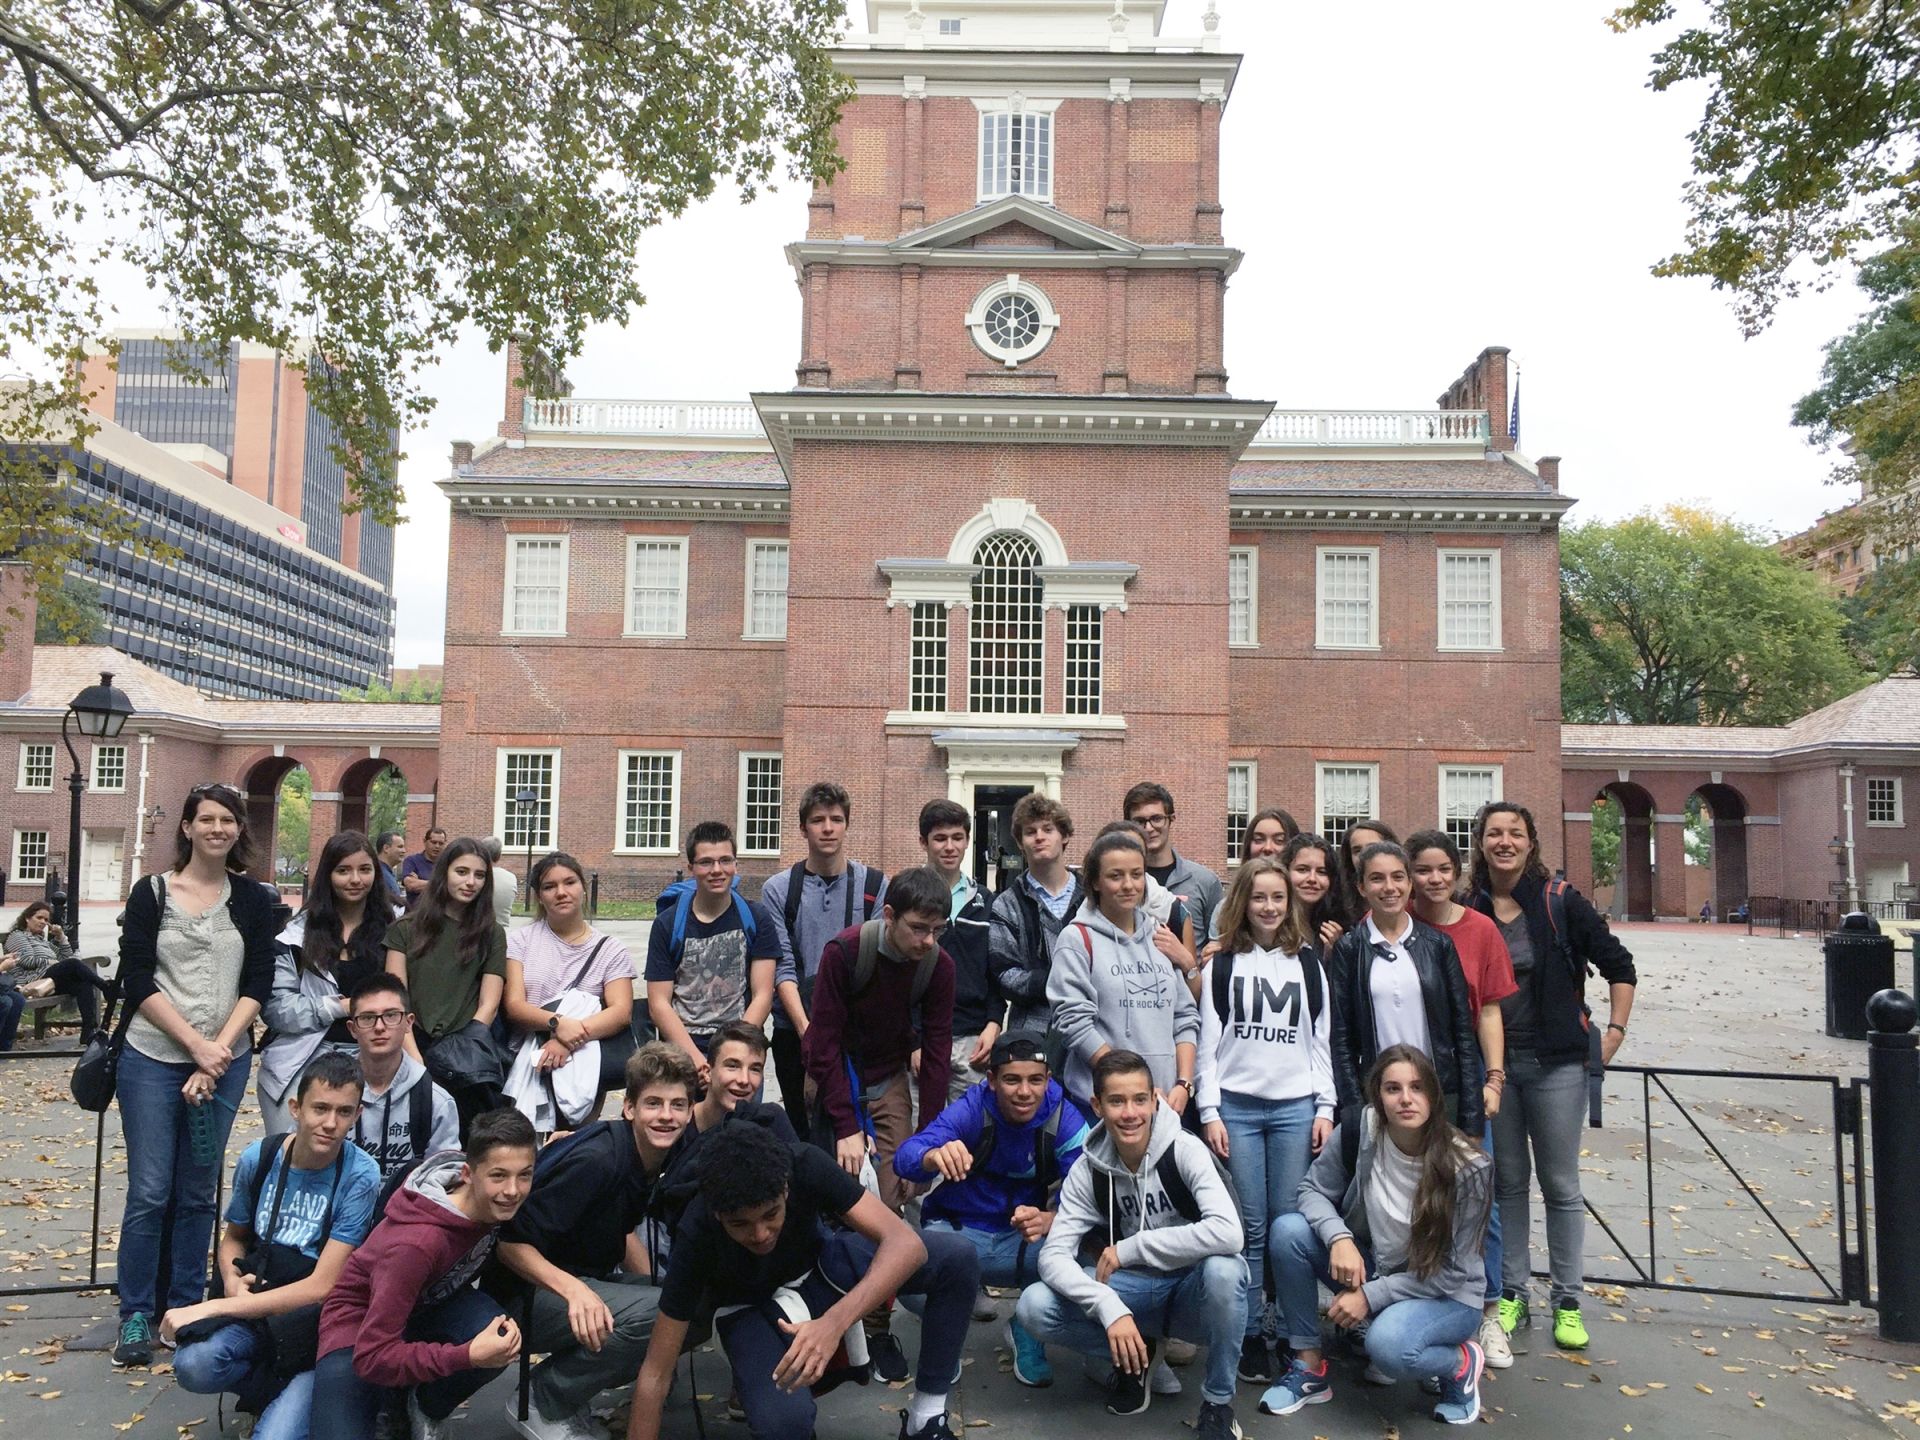 Upper School students with exchange students from france and spain